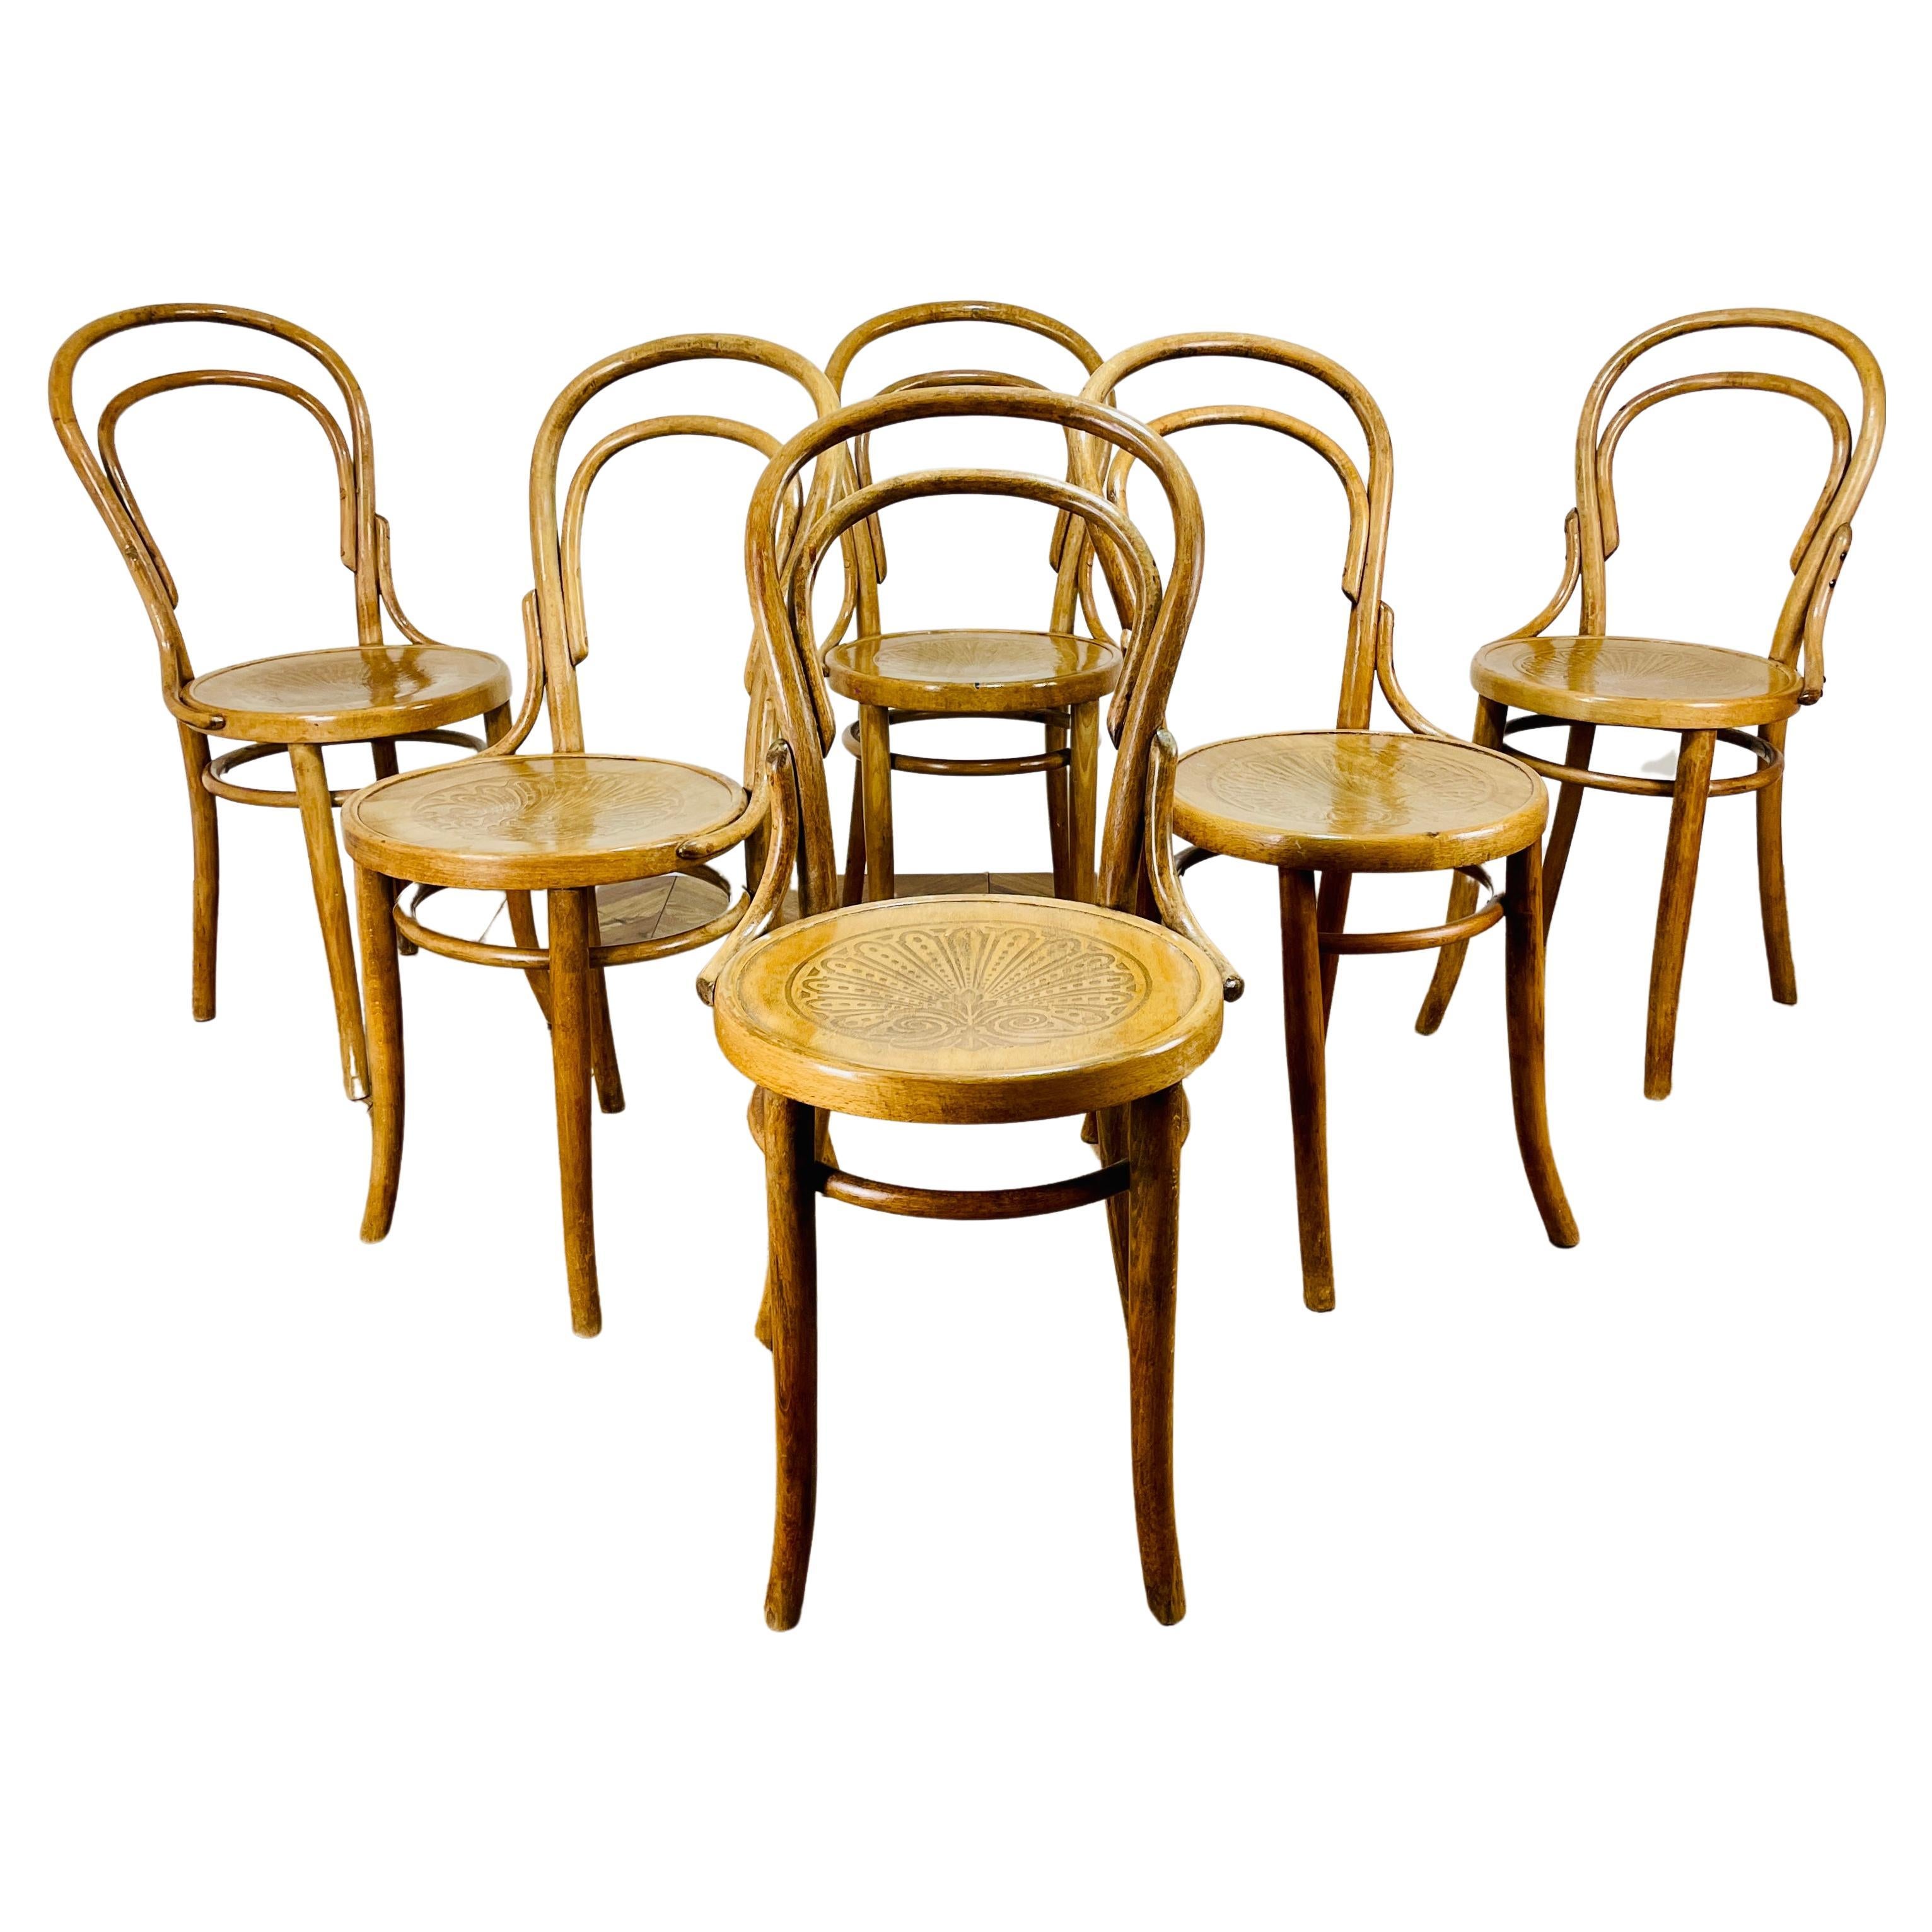 Midcentury Bentwood Cafe / Bistro Chairs, Set of 6, 1930s